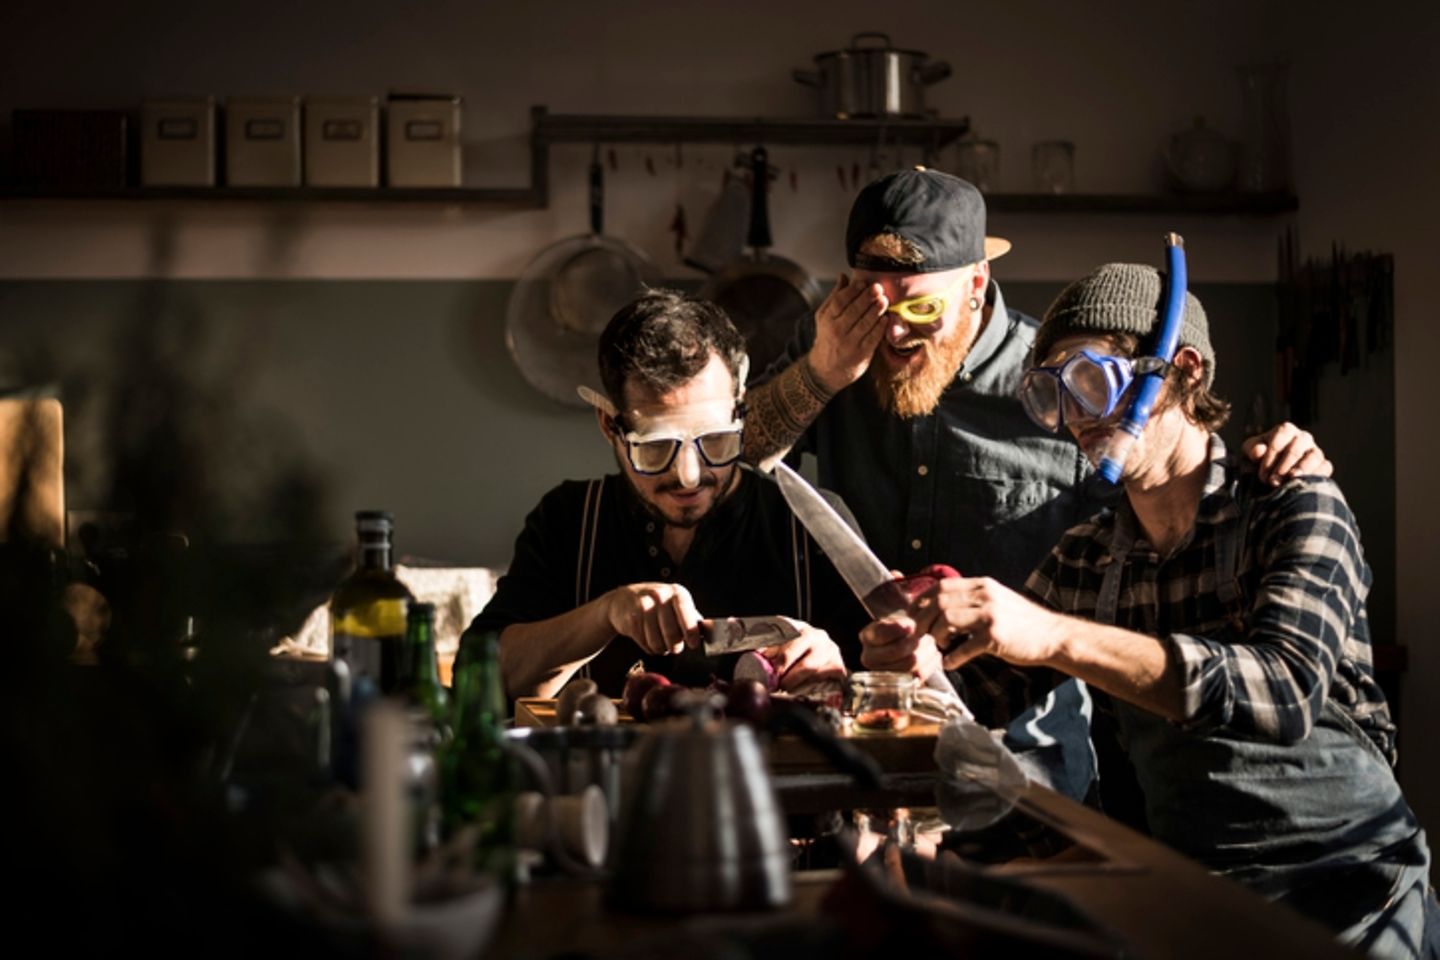 Three men cook together and cut onions with diving goggles on.